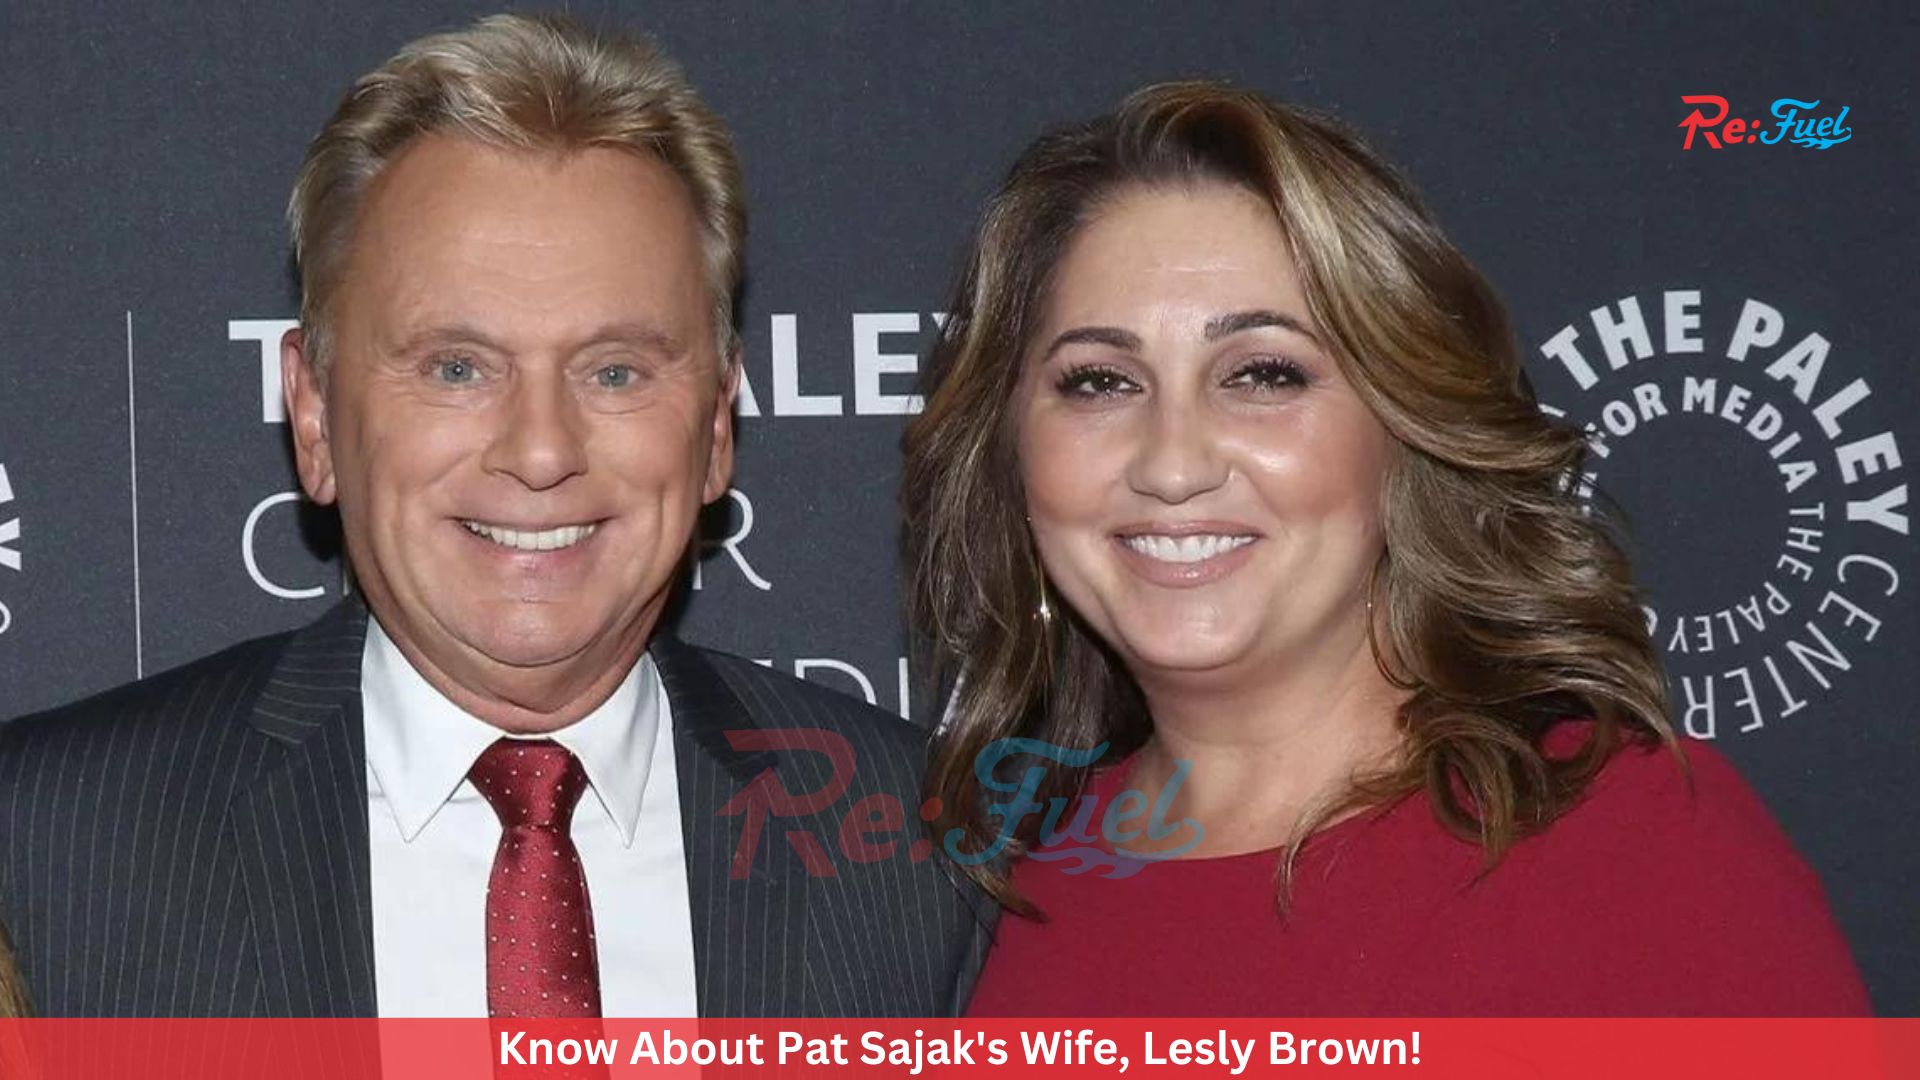 Know About Pat Sajak's Wife, Lesly Brown!